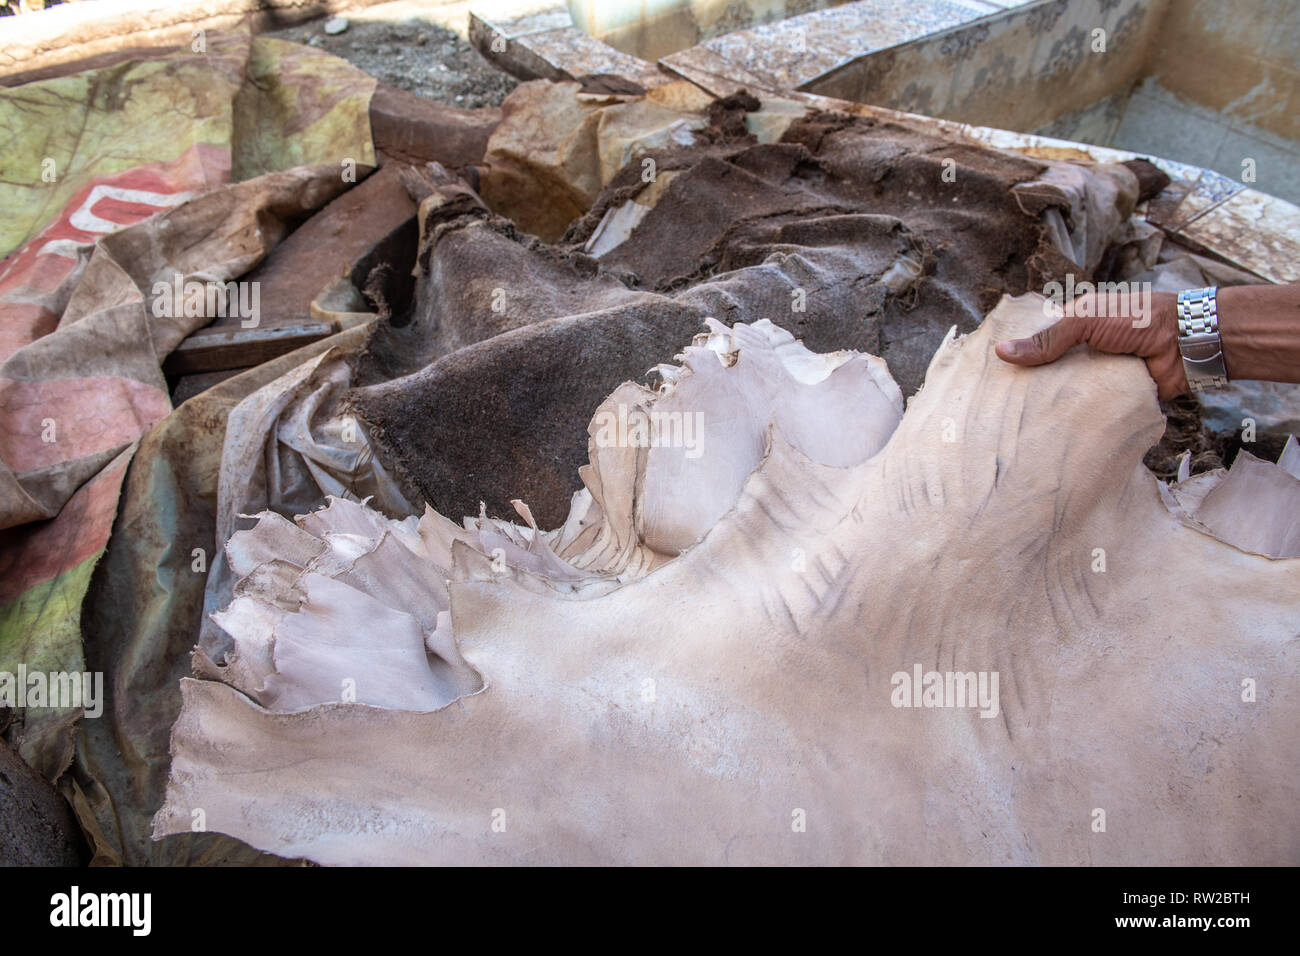 Man feels tanned leather hide at tannery, Marrekech, Morocco Stock Photo